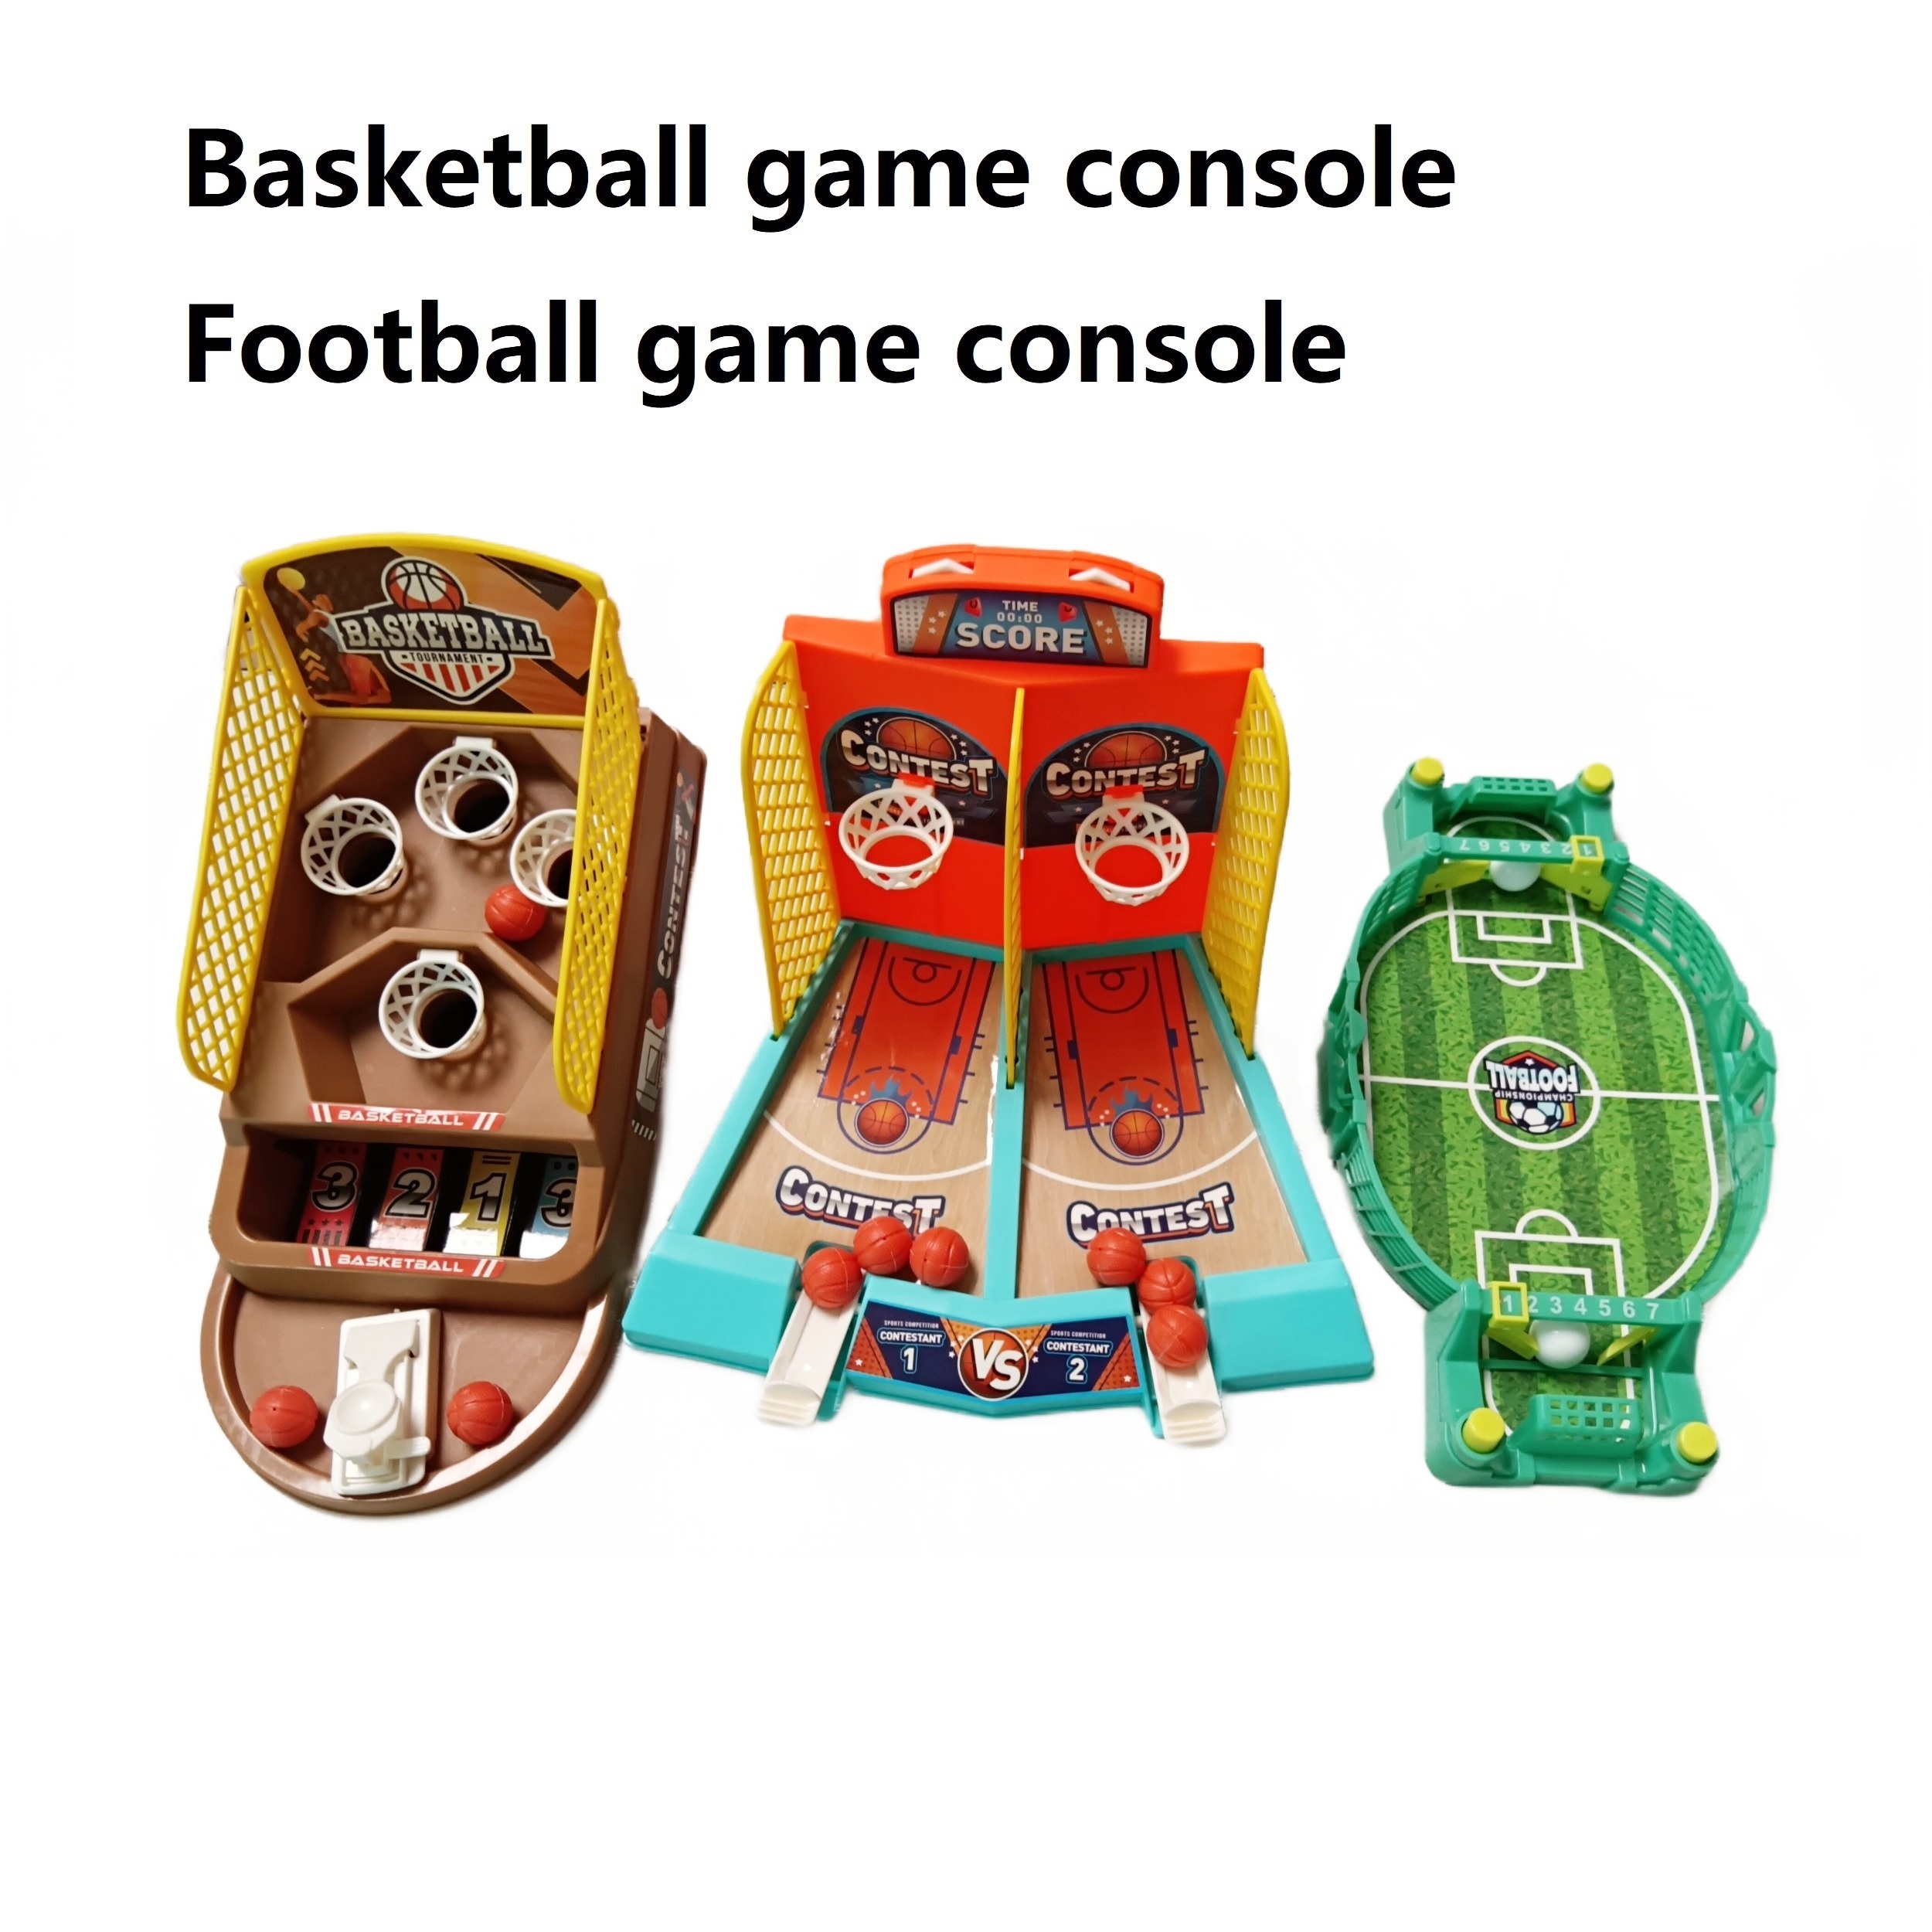 Brain-boosting Arcade Machine For Kids & Adults - Roll The Ball